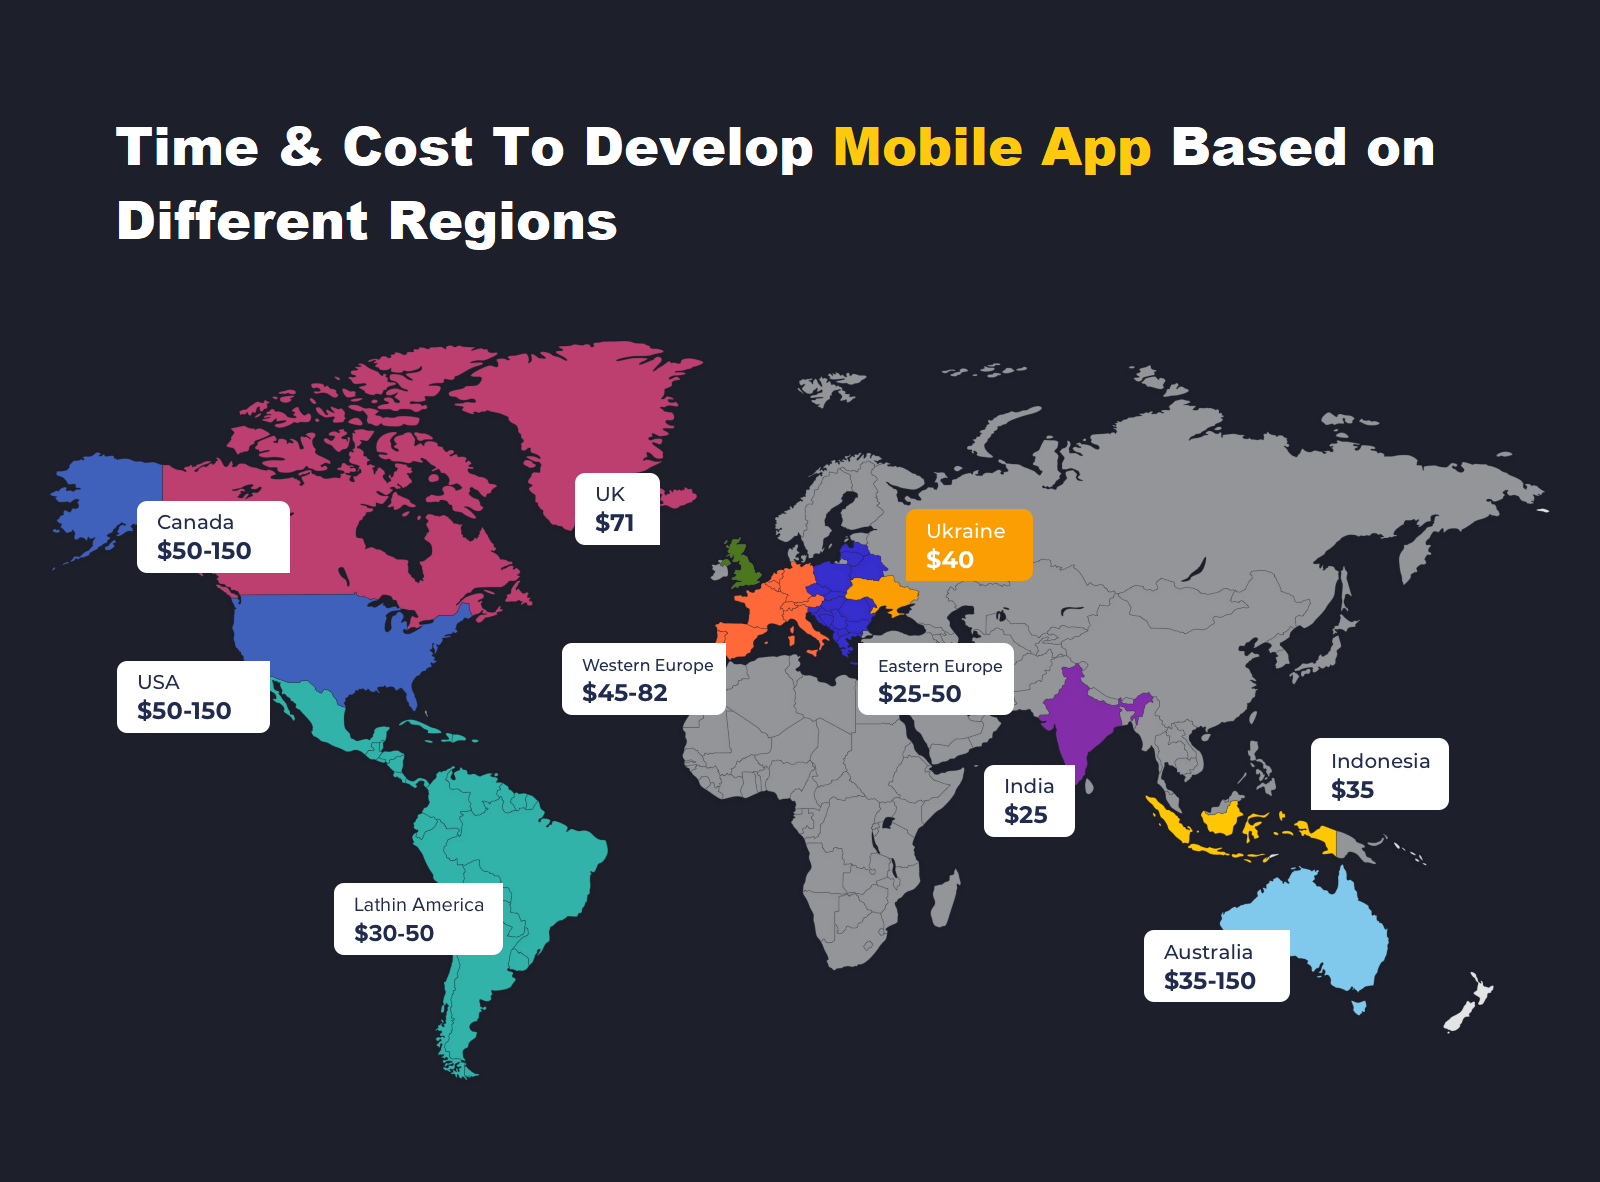 Time & Cost To Develop Mobile App Based on Different Regions